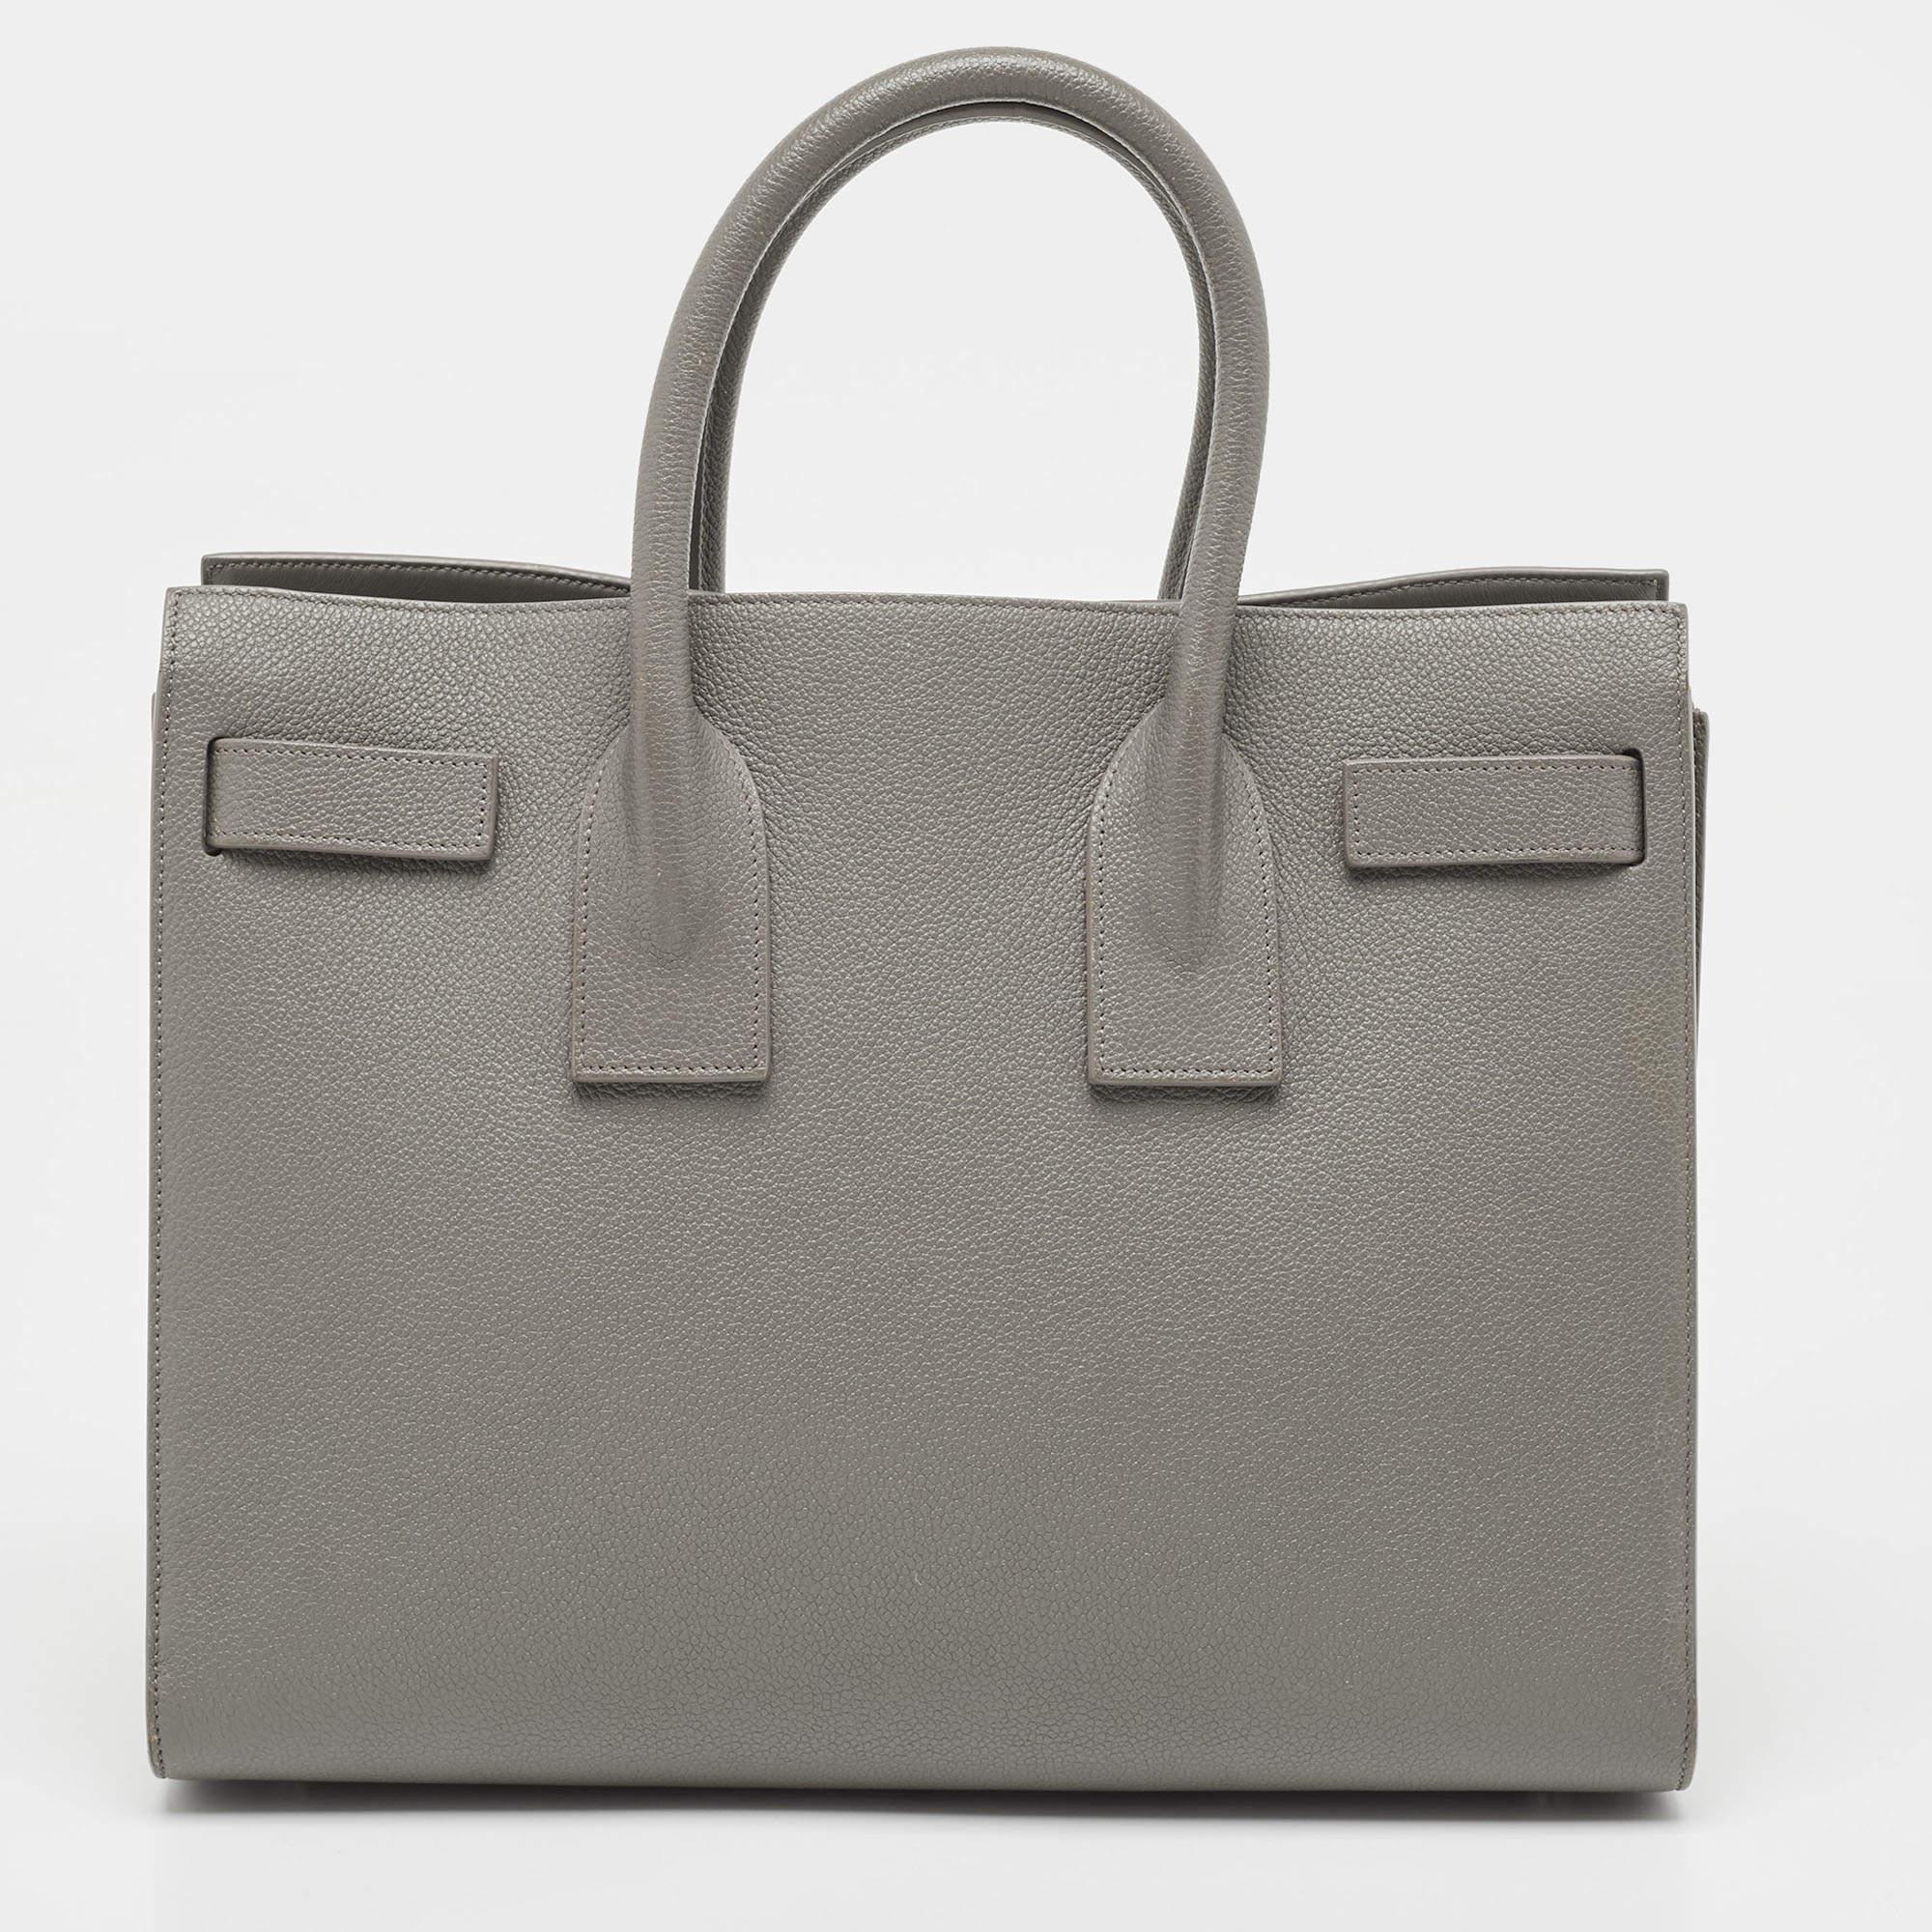 Striking a beautiful balance between essentiality and opulence, this tote from the House of Saint Laurent ensures that your handbag requirements are taken care of. It is equipped with practical features for all-day ease.

Includes: Info Booklet,